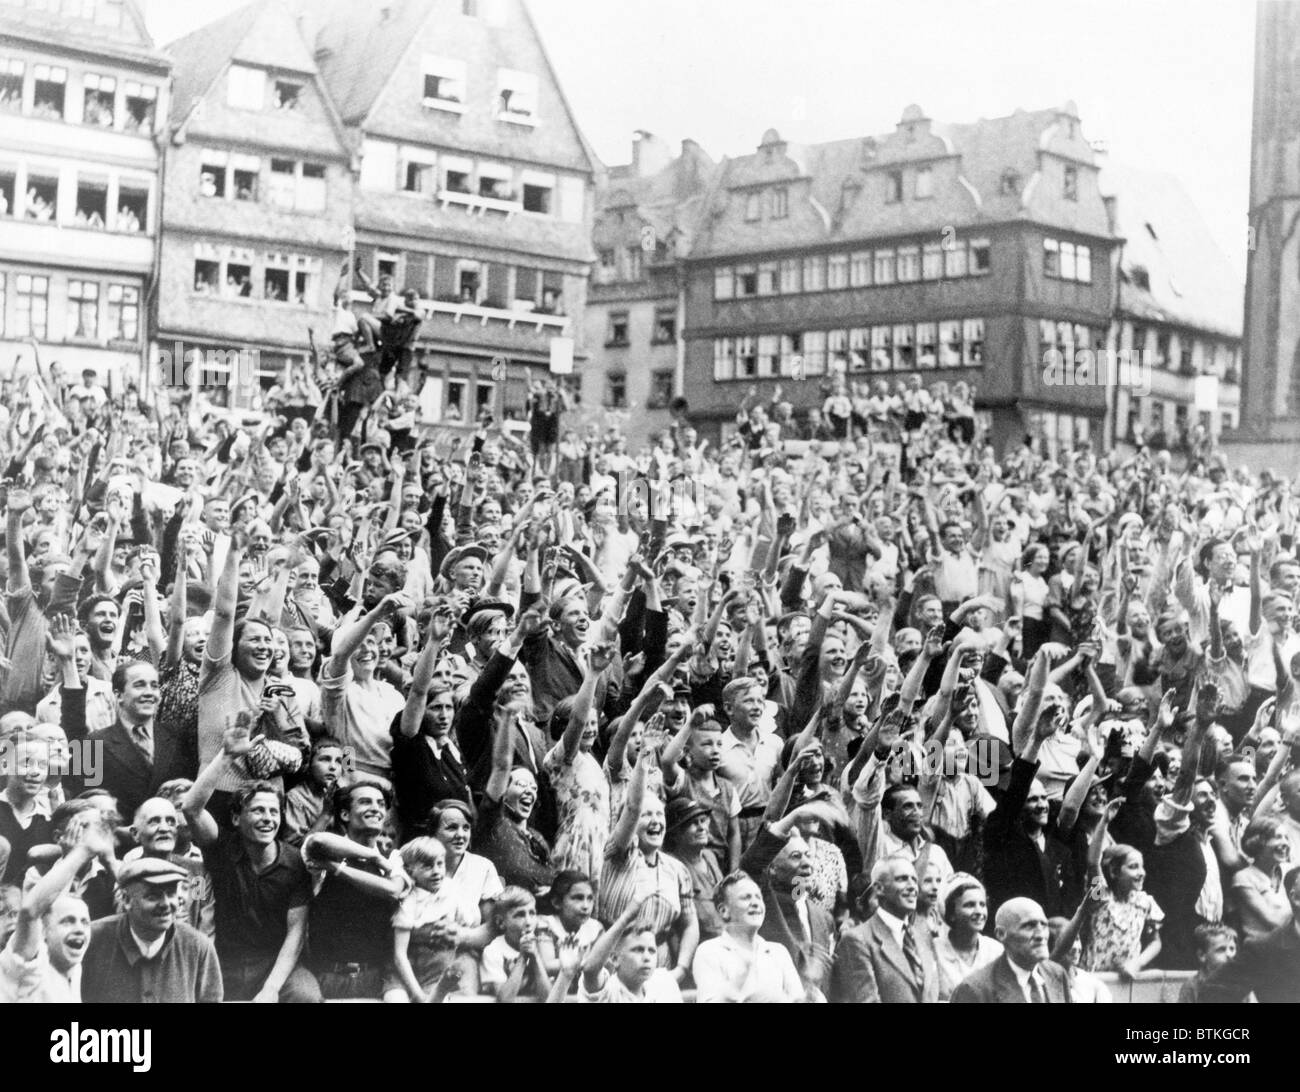 German admirers cheering Max Schmeling with a Nazi salute at City Hall in Frankfort, Germany. On June 19, 1936, Schmeling won the heavy weight championship with a 12th-round knockout of Joe Louis. Stock Photo